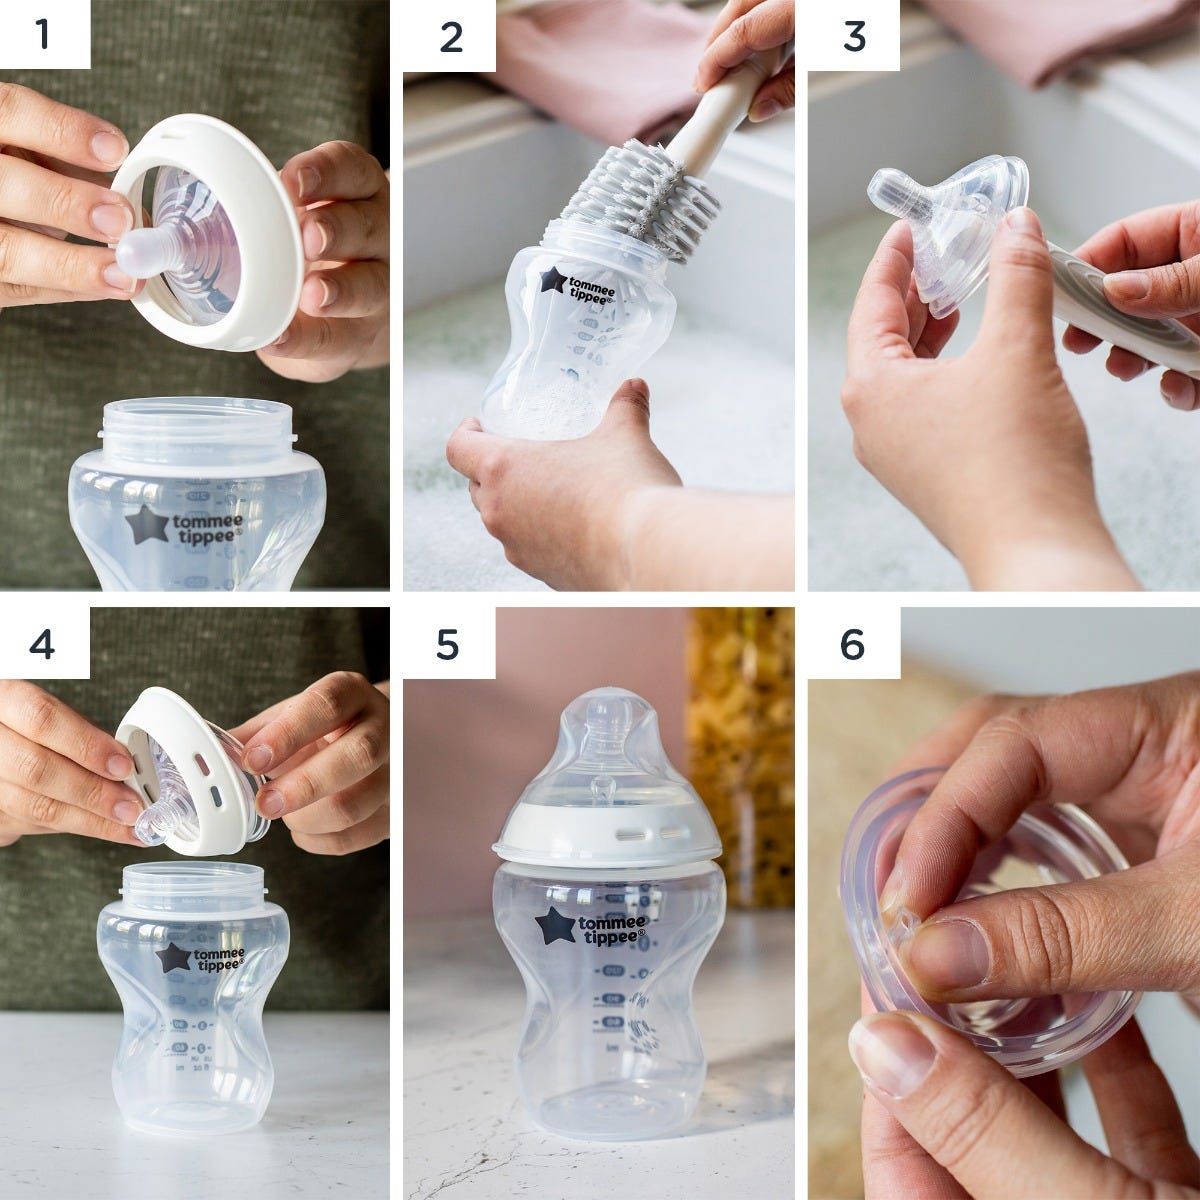 Image showing how to prepare Natural Start bottle for use